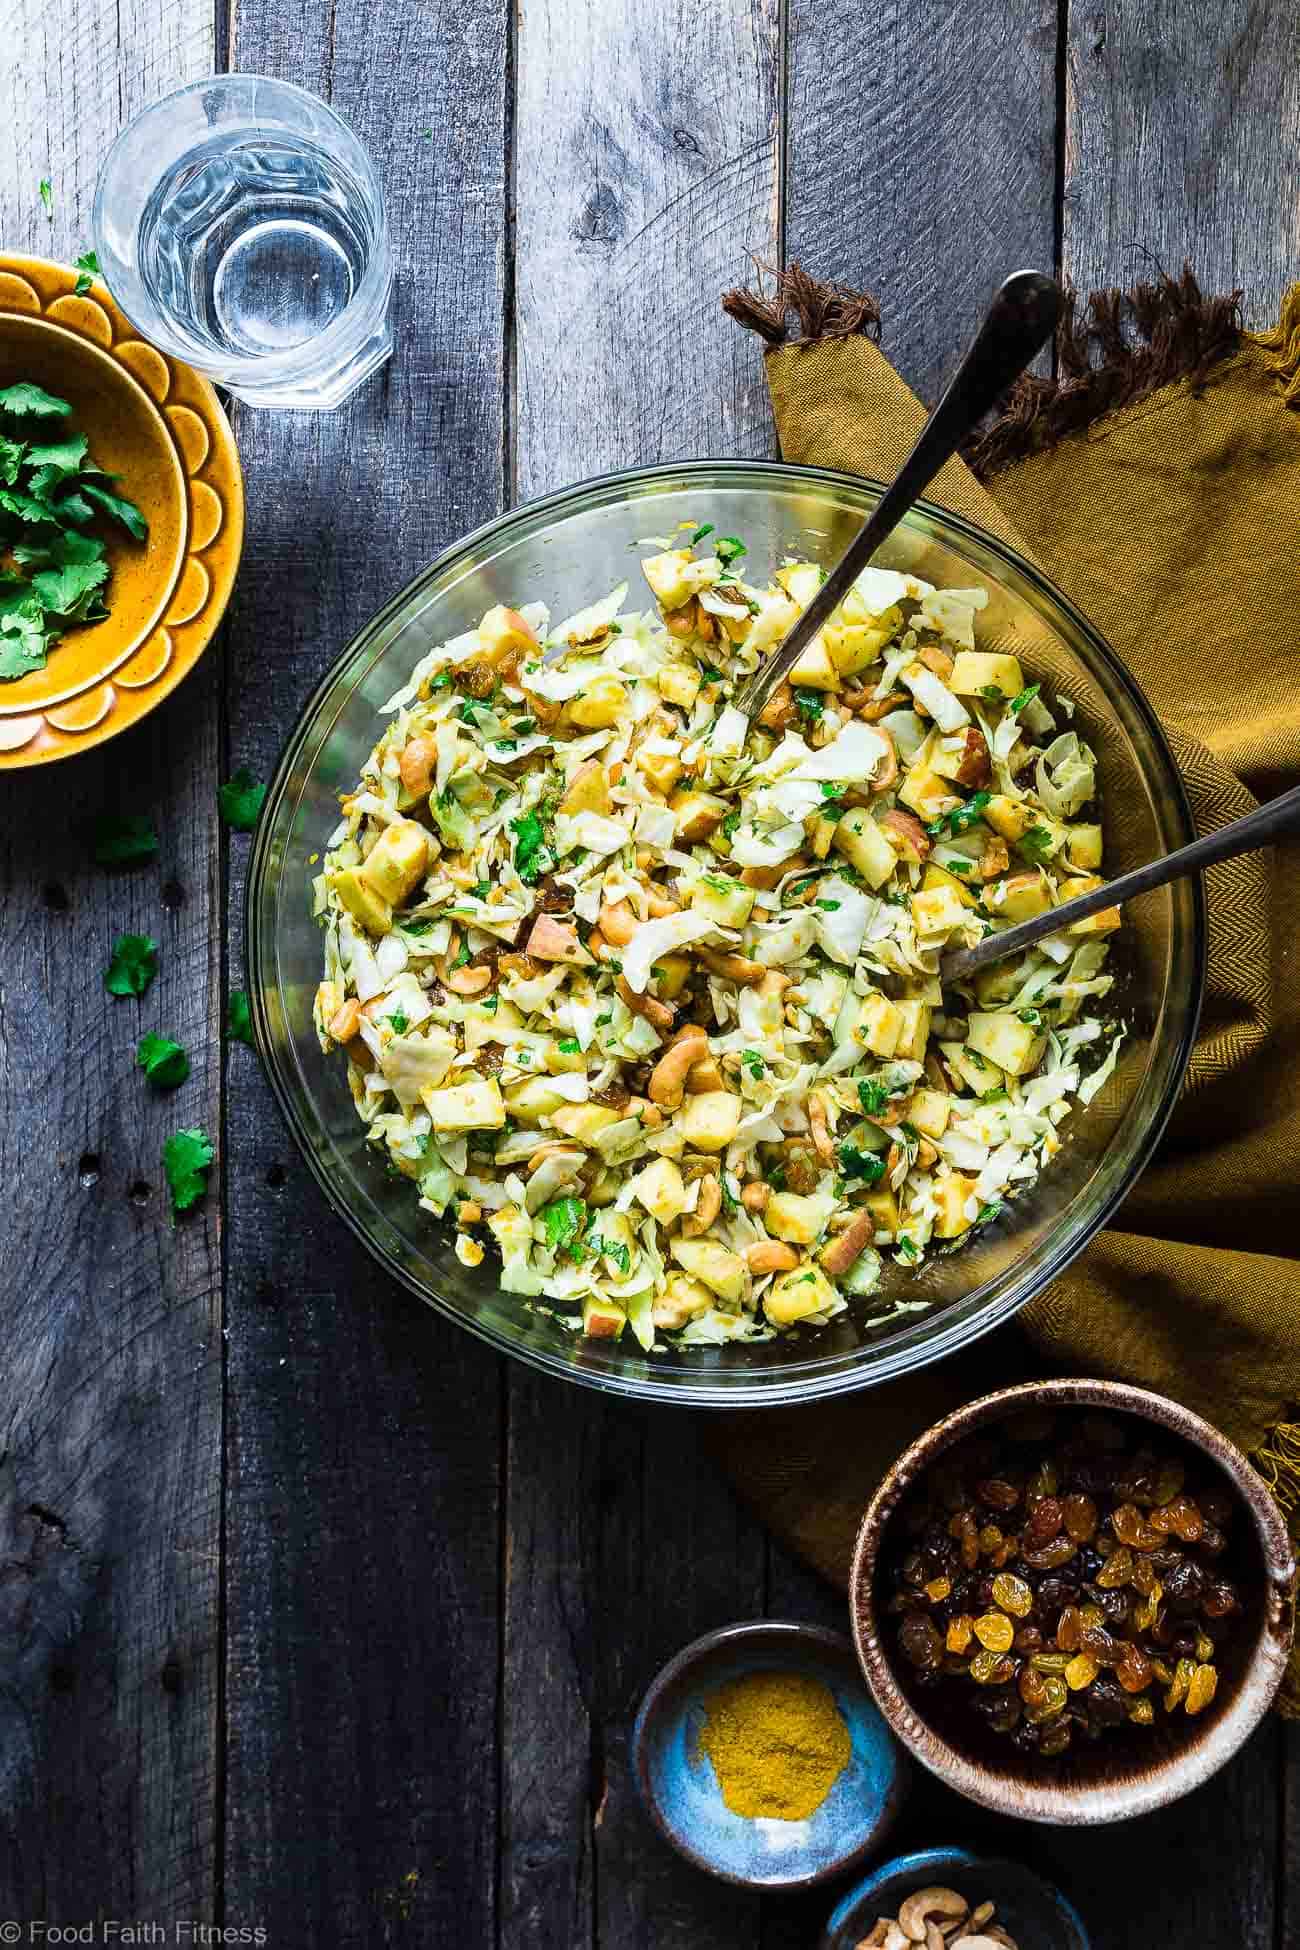 Curry Cashew Shredded Cabbage Salad with Apples - A sugar and gluten free healthy salad that is mixed with a creamy curry dressing and crunchy cashews! A healthy, paleo and whole30 side dish that everyone will love! | Foodfaithfitness.com | @FoodFaithFit